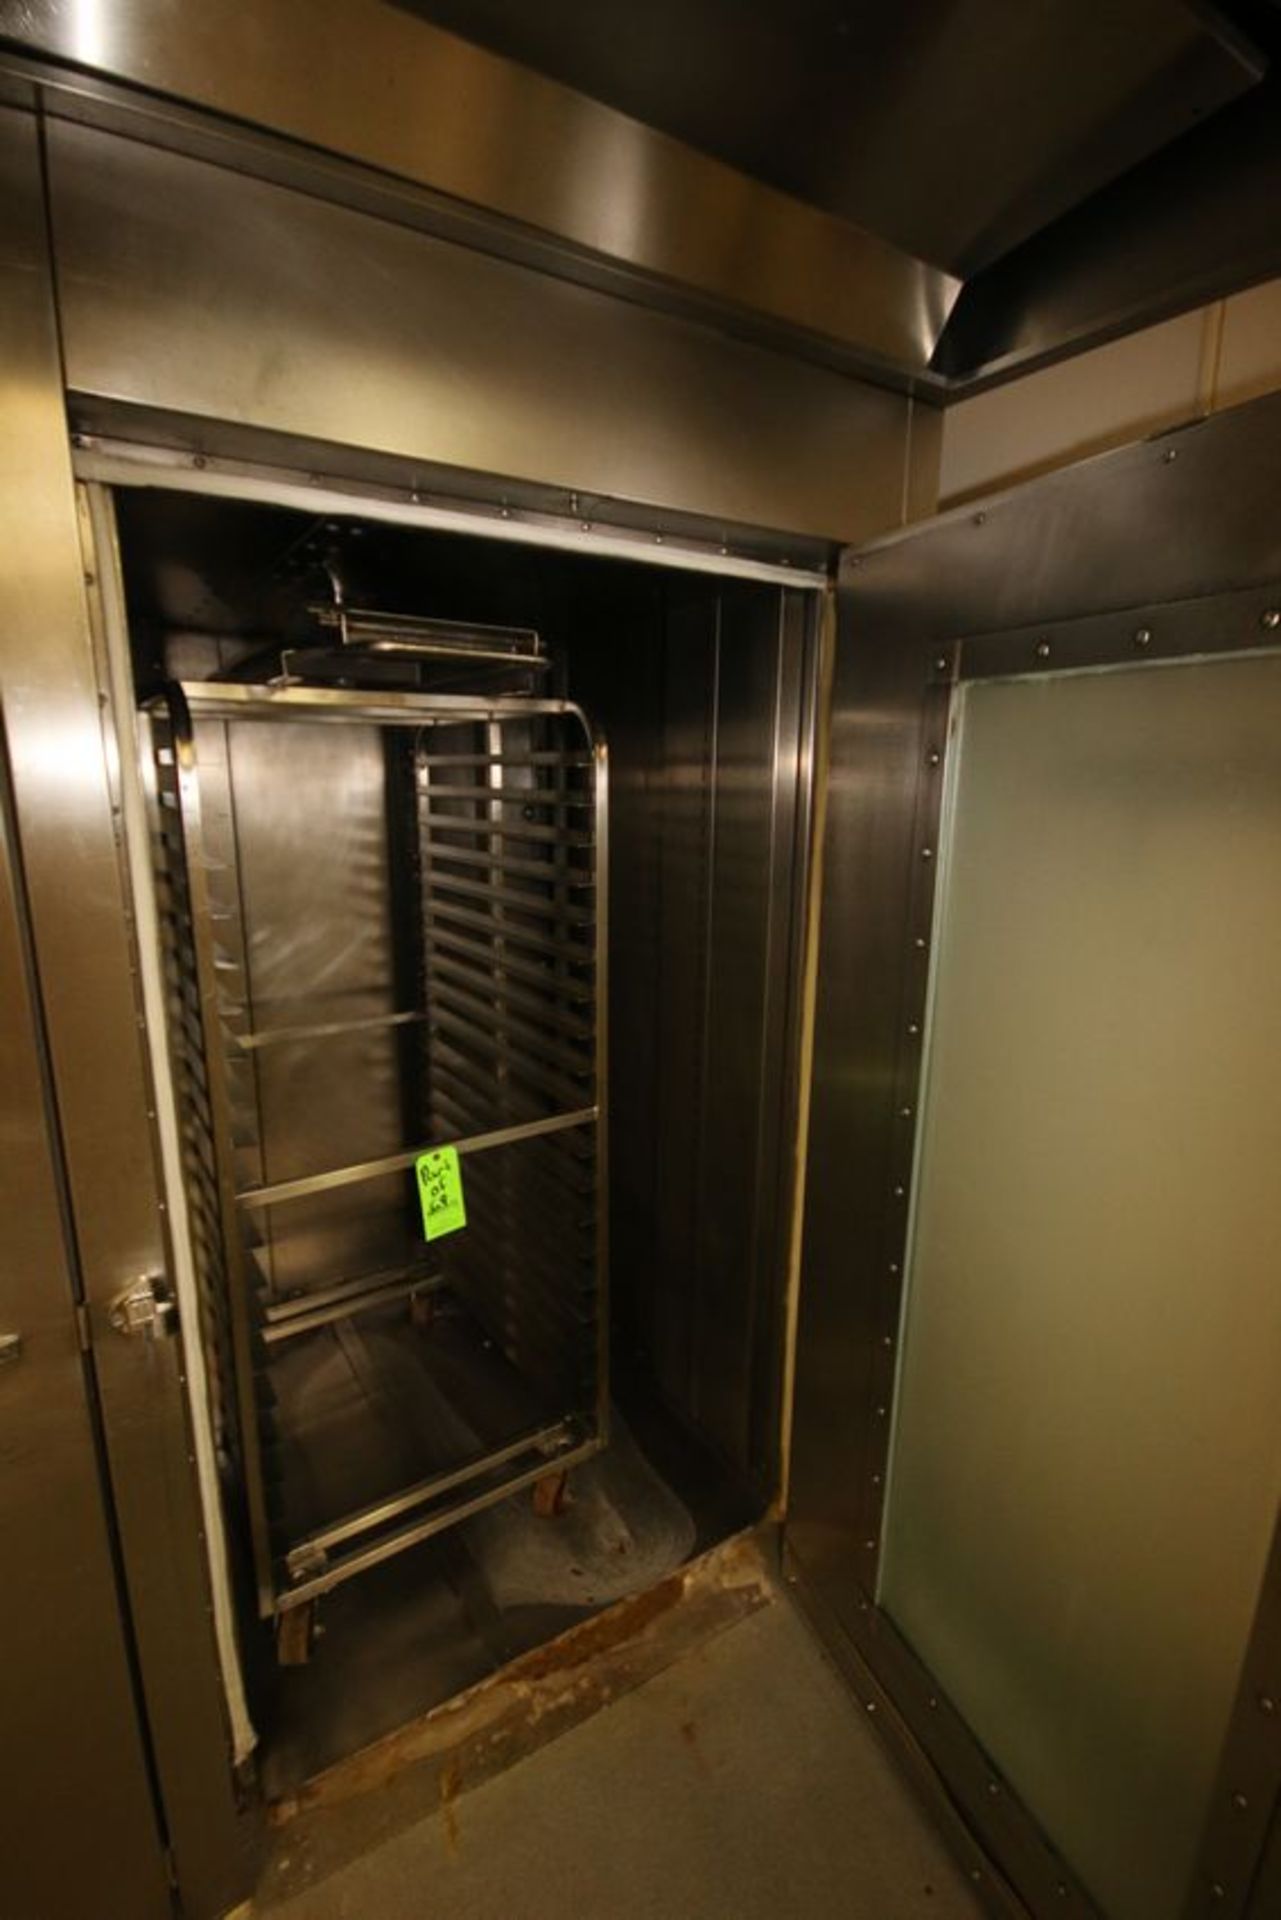 Hobart S/S Rotating Double Rack Oven, S/N 24-10126381, Input Rating 300,000 BTU/Hr. with Digital - Image 2 of 3